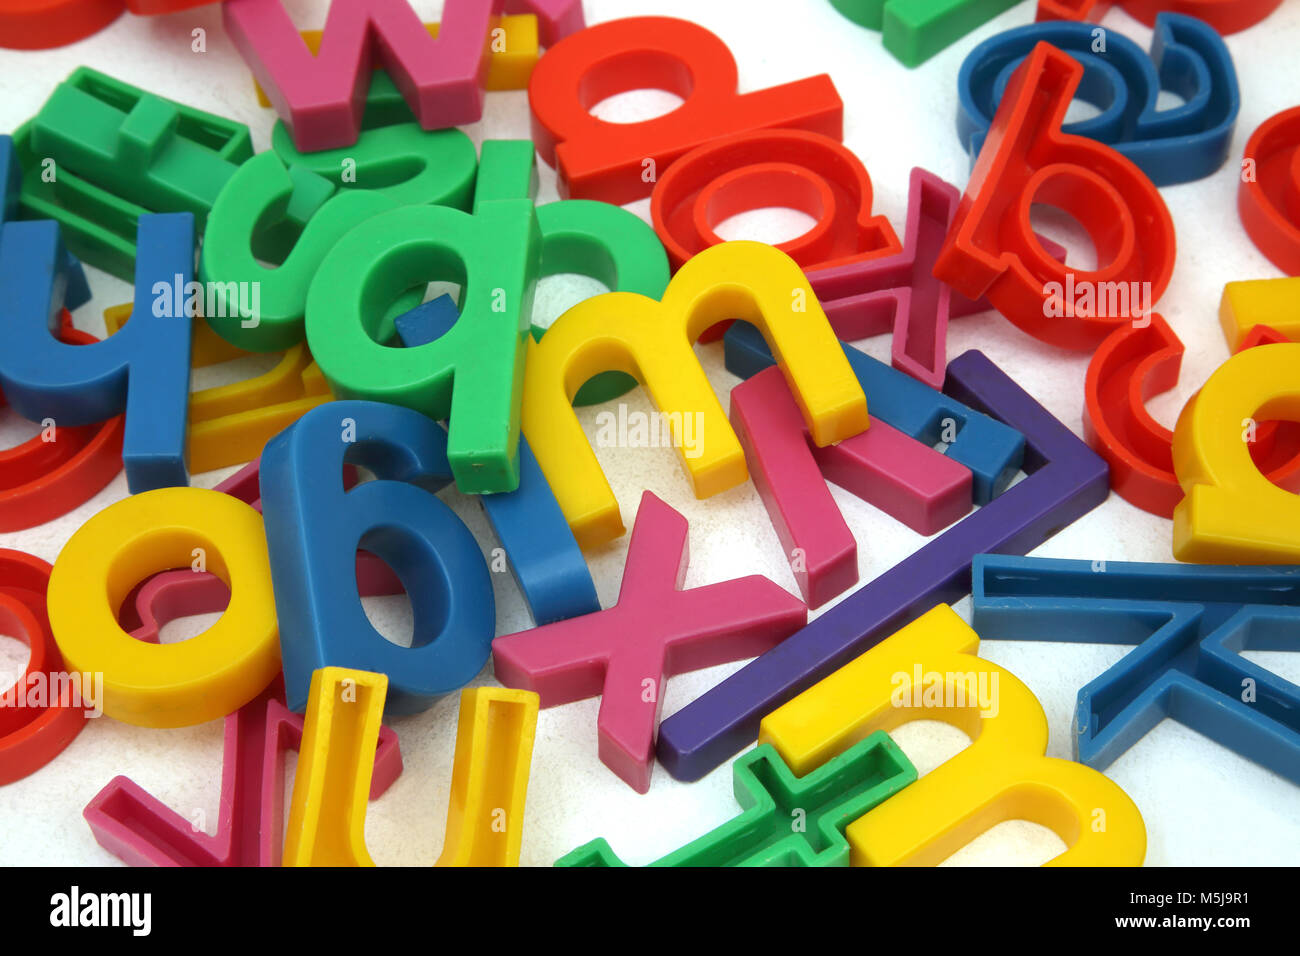 Colourful Plastic Letters Educational Toy Stock Photo